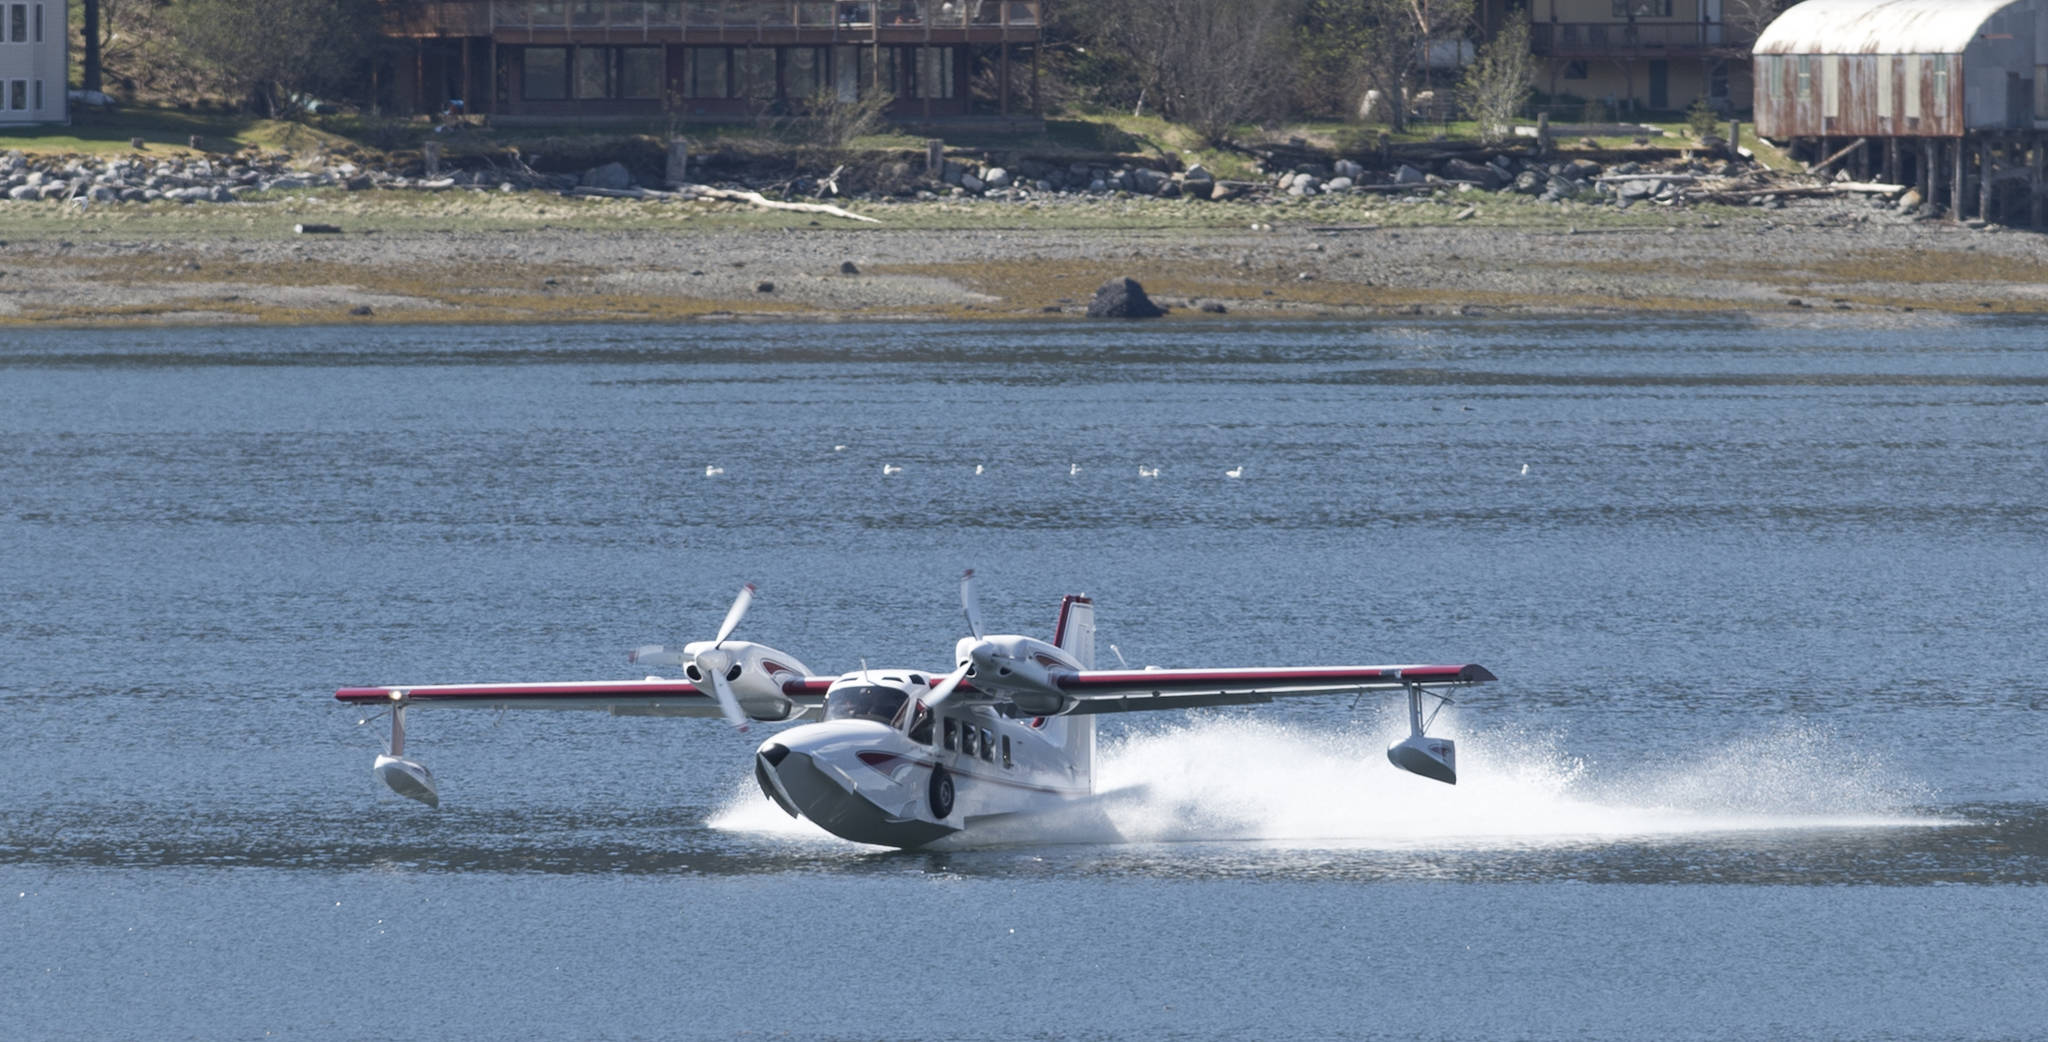 Ross Mahon and Ben Ellison touchdown in Juneau downtown harbor in a plane they’re calling a Gweduck (misspelled on purpose) on Thursday, May 4, 2017. A “new twist on an old design,” the plane looks like an vintage aircraft but is made with modern materials. It began as a side project for the two aeronautical engineers from Seattle and is now a reality. It made the stop in Juneau on Thursday on its way to Anchorage. (Michael Penn | Juneau Empire)